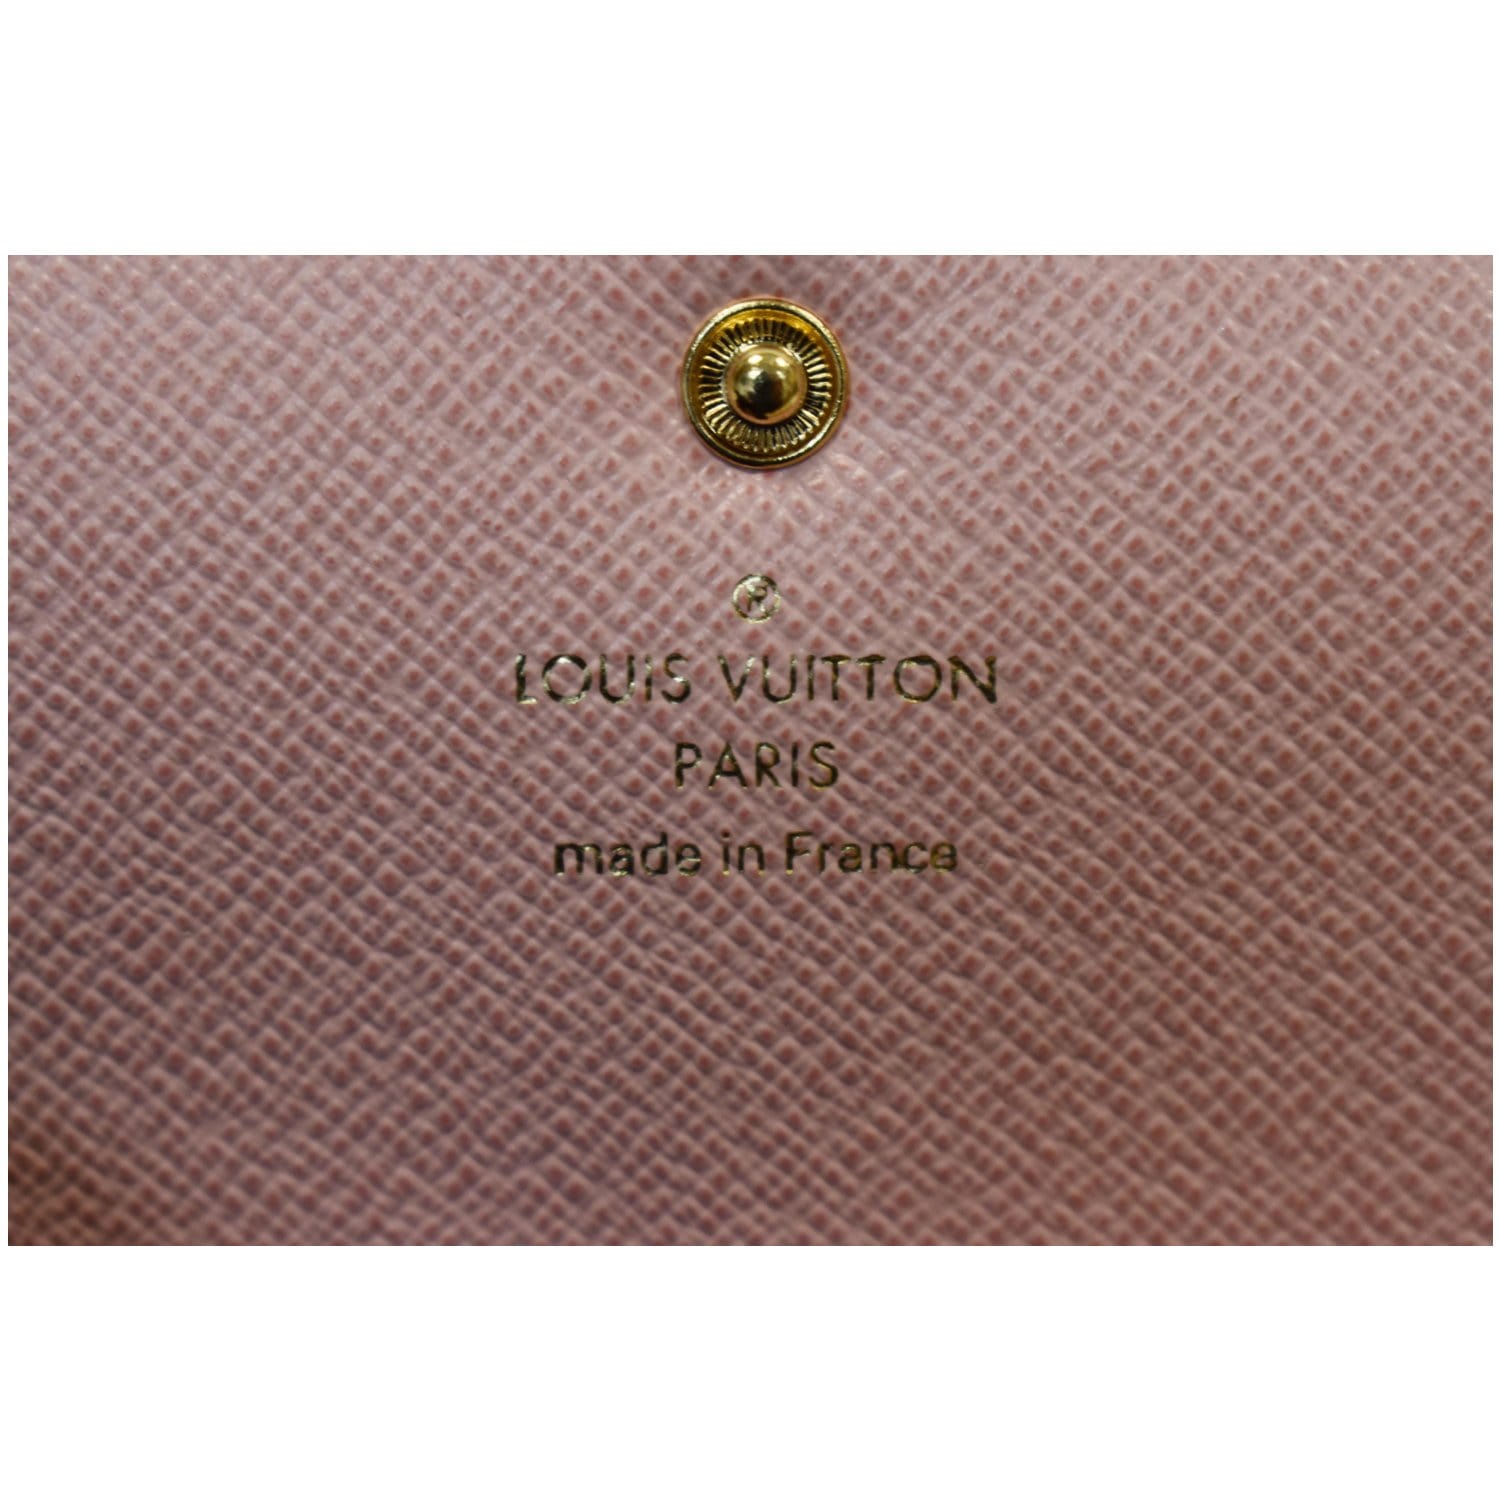 louis vuitton wallet with pink button